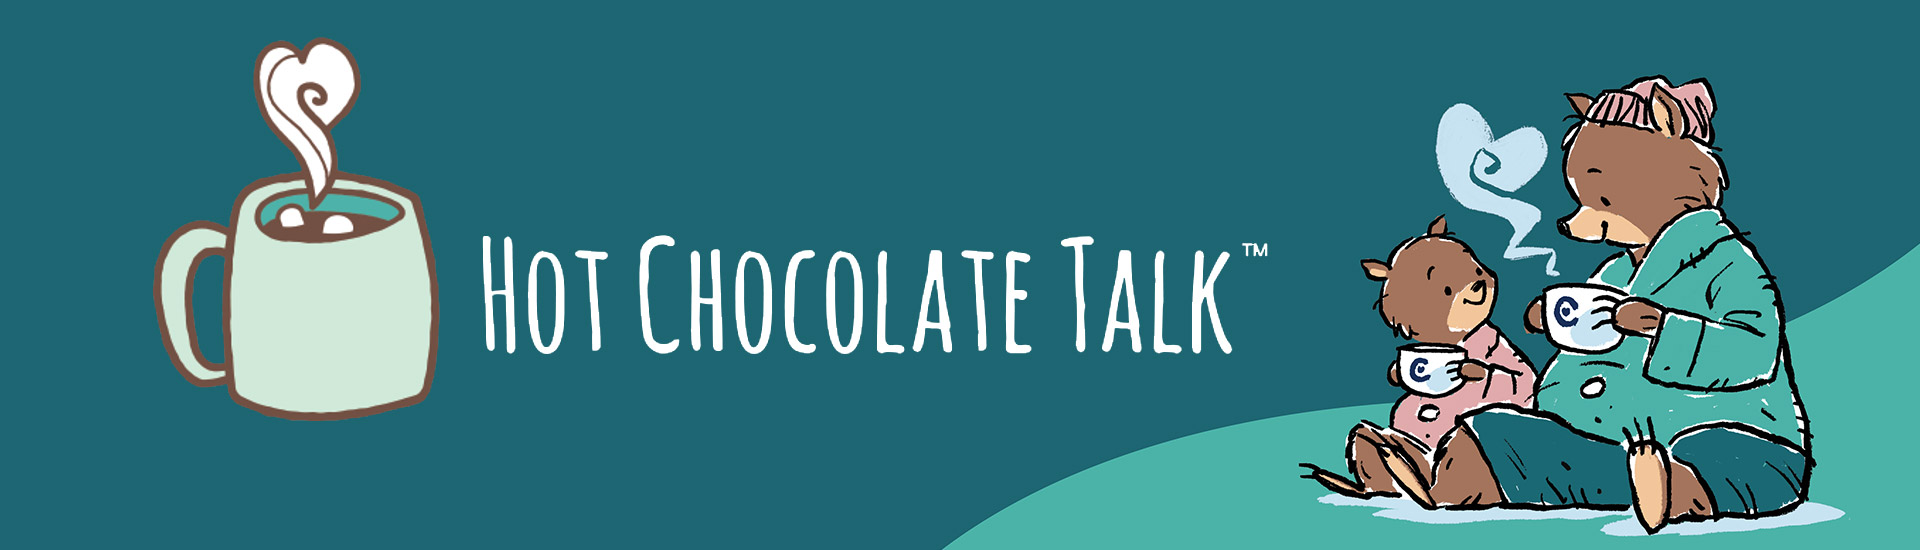 Child Sexual Abuse Prevention: Hot Chocolate Talk® Campaign (Spanish)